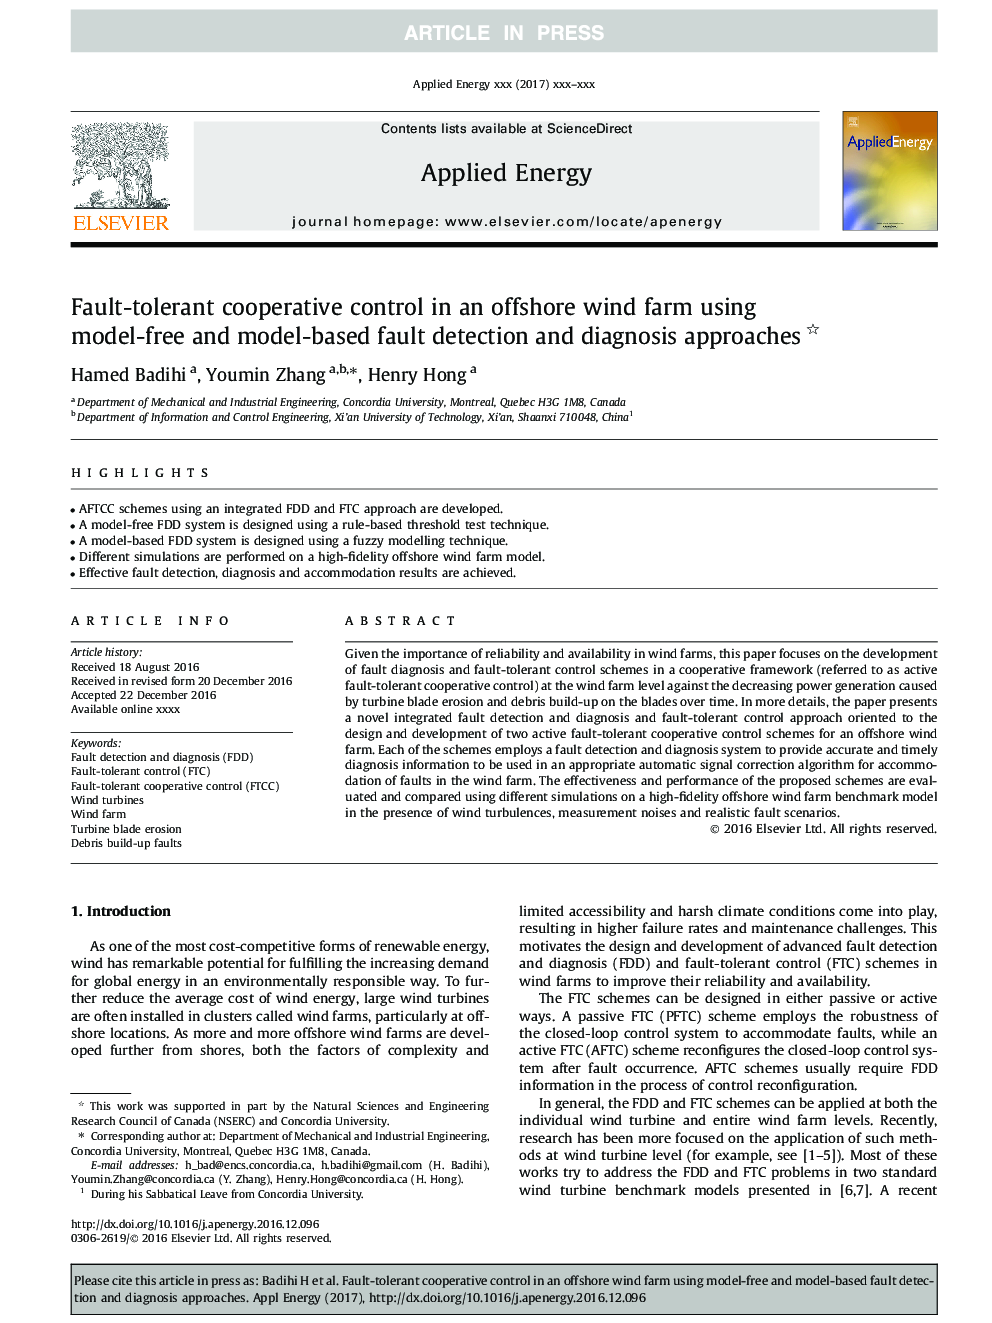 Fault-tolerant cooperative control in an offshore wind farm using model-free and model-based fault detection and diagnosis approaches